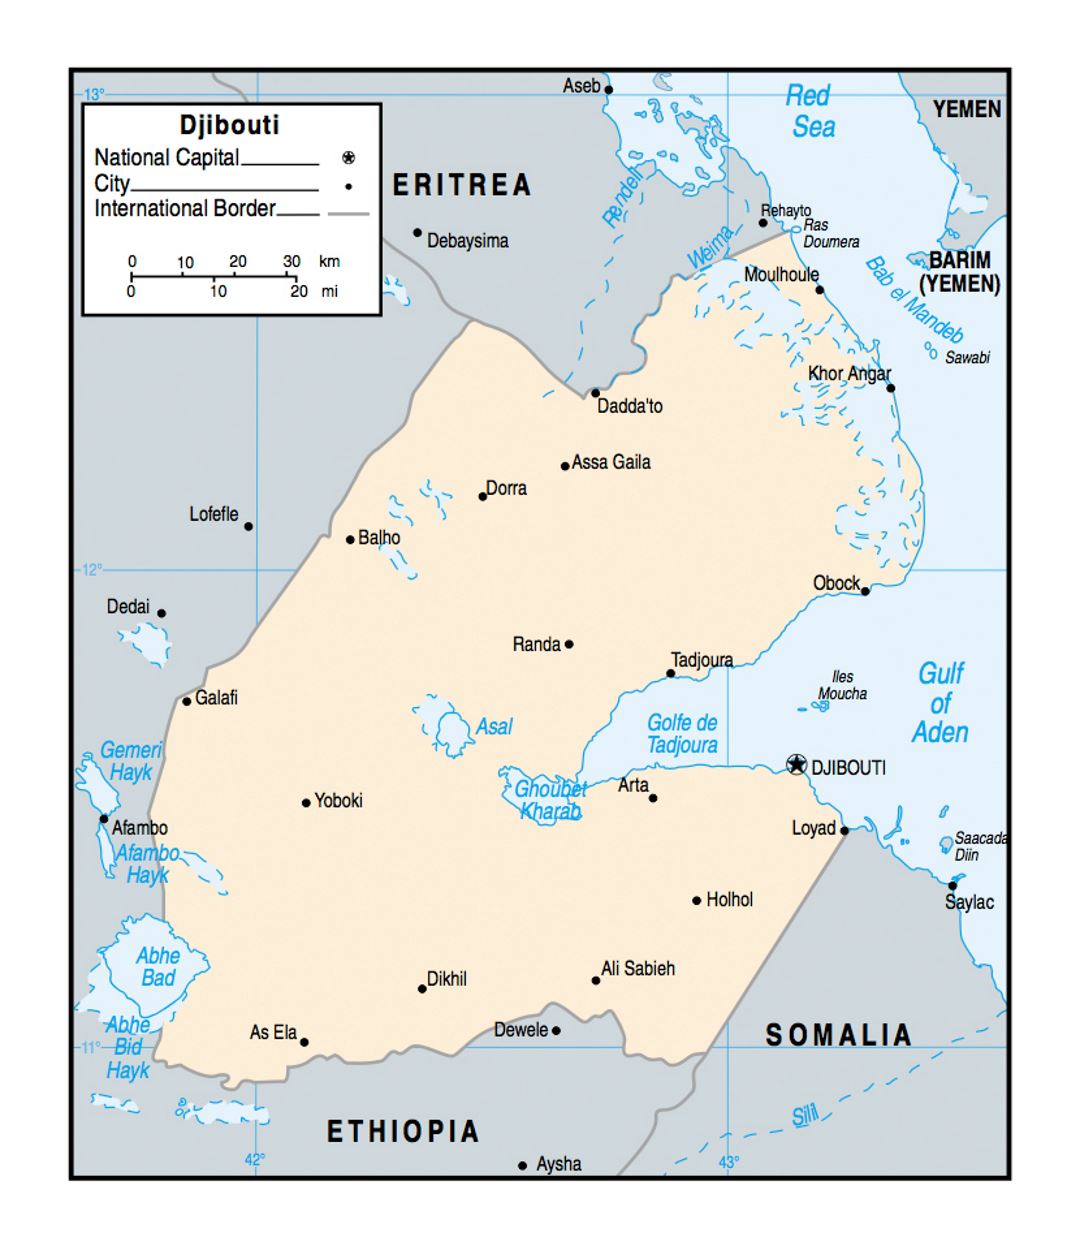 Political map of Djibouti with cities - 2002